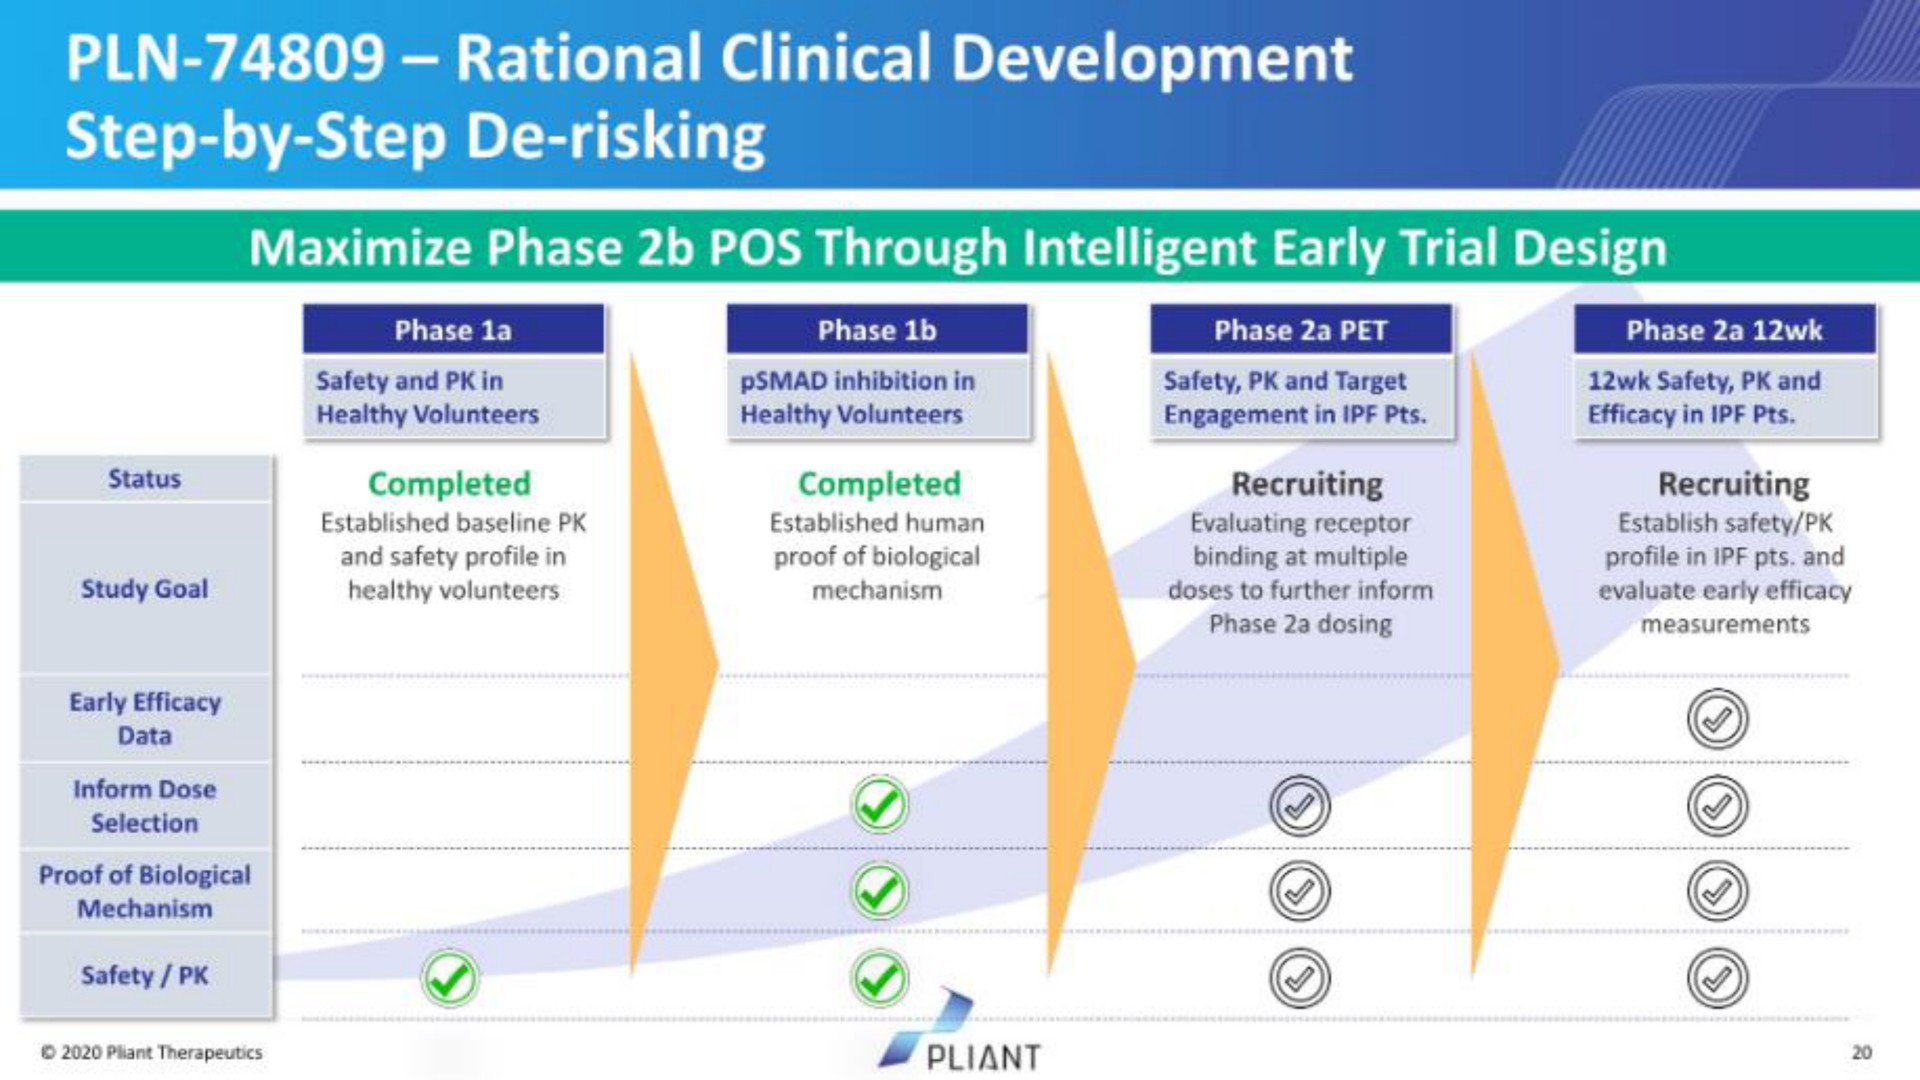 rational clinical development step by step risking | Pilant Therapeutics